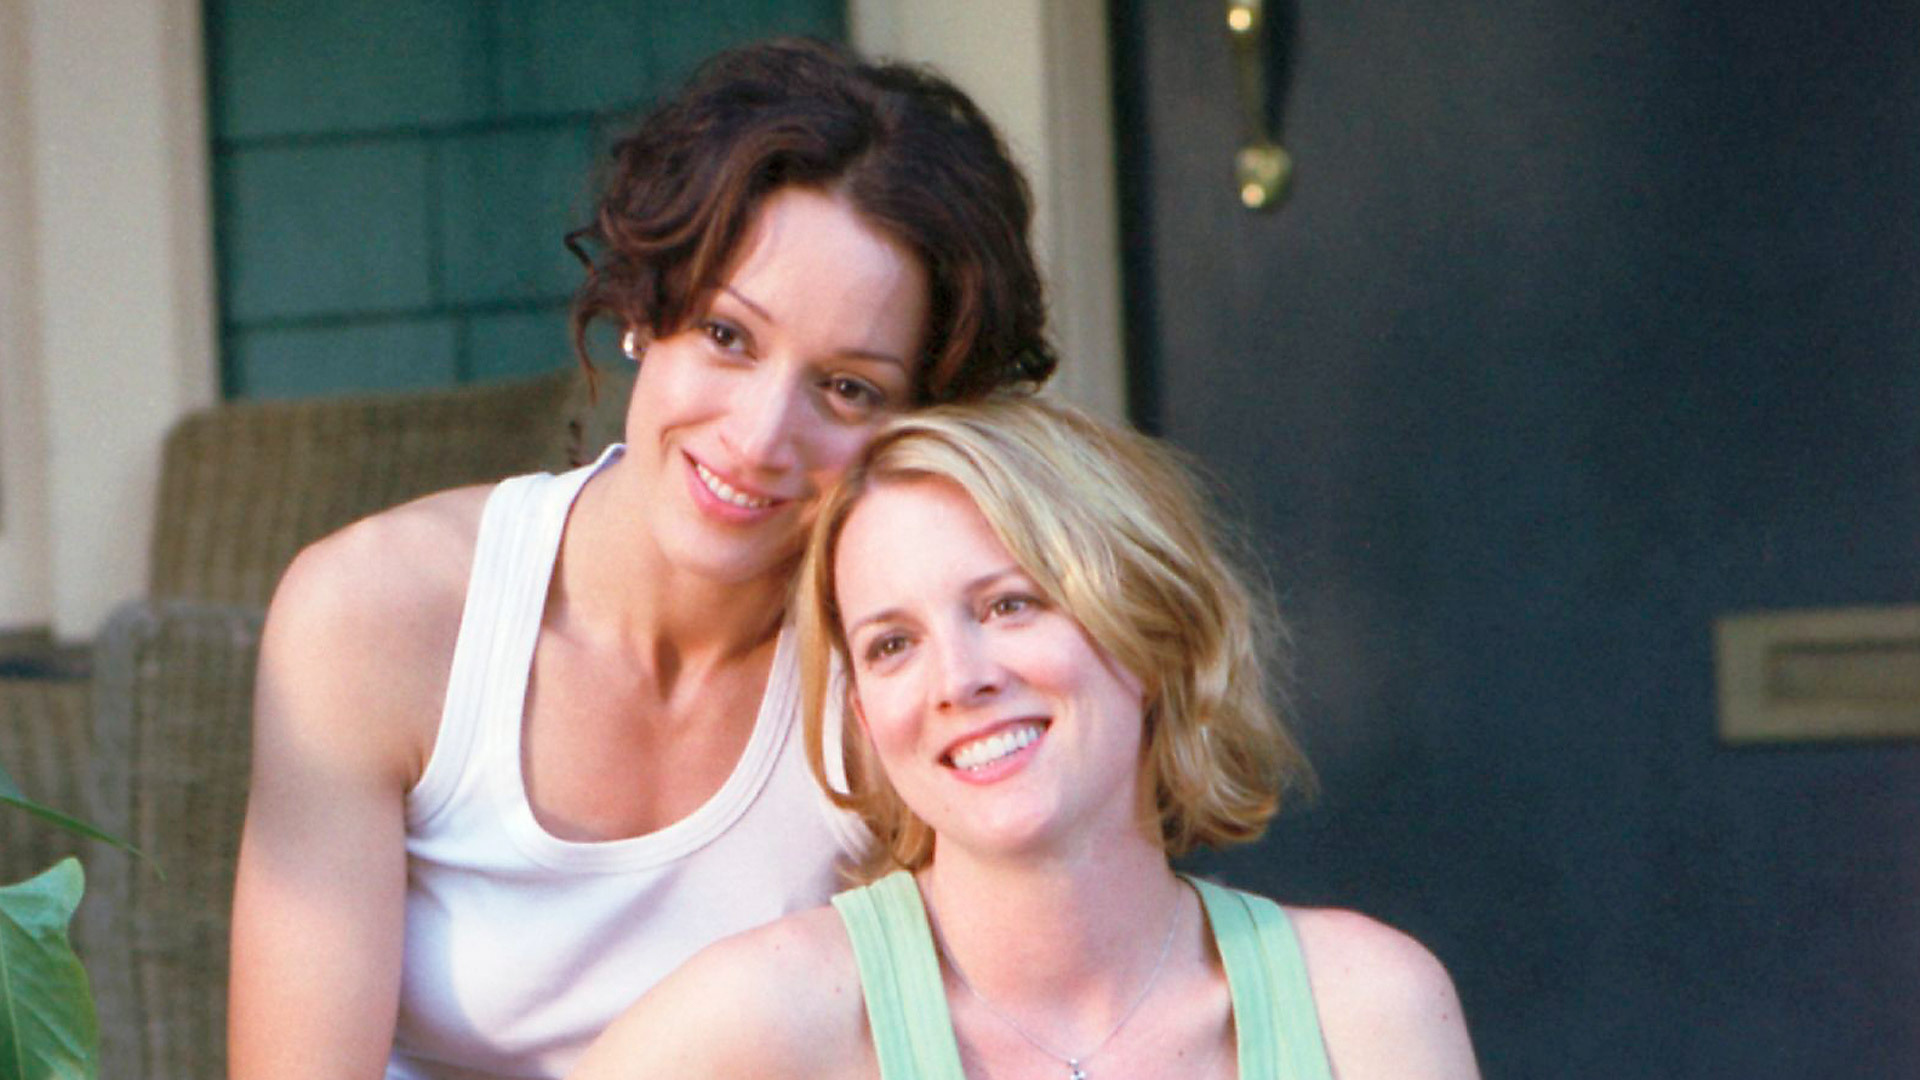 Watch The L Word Season 1 Episode 2: Pilot Part 2 - Full show on